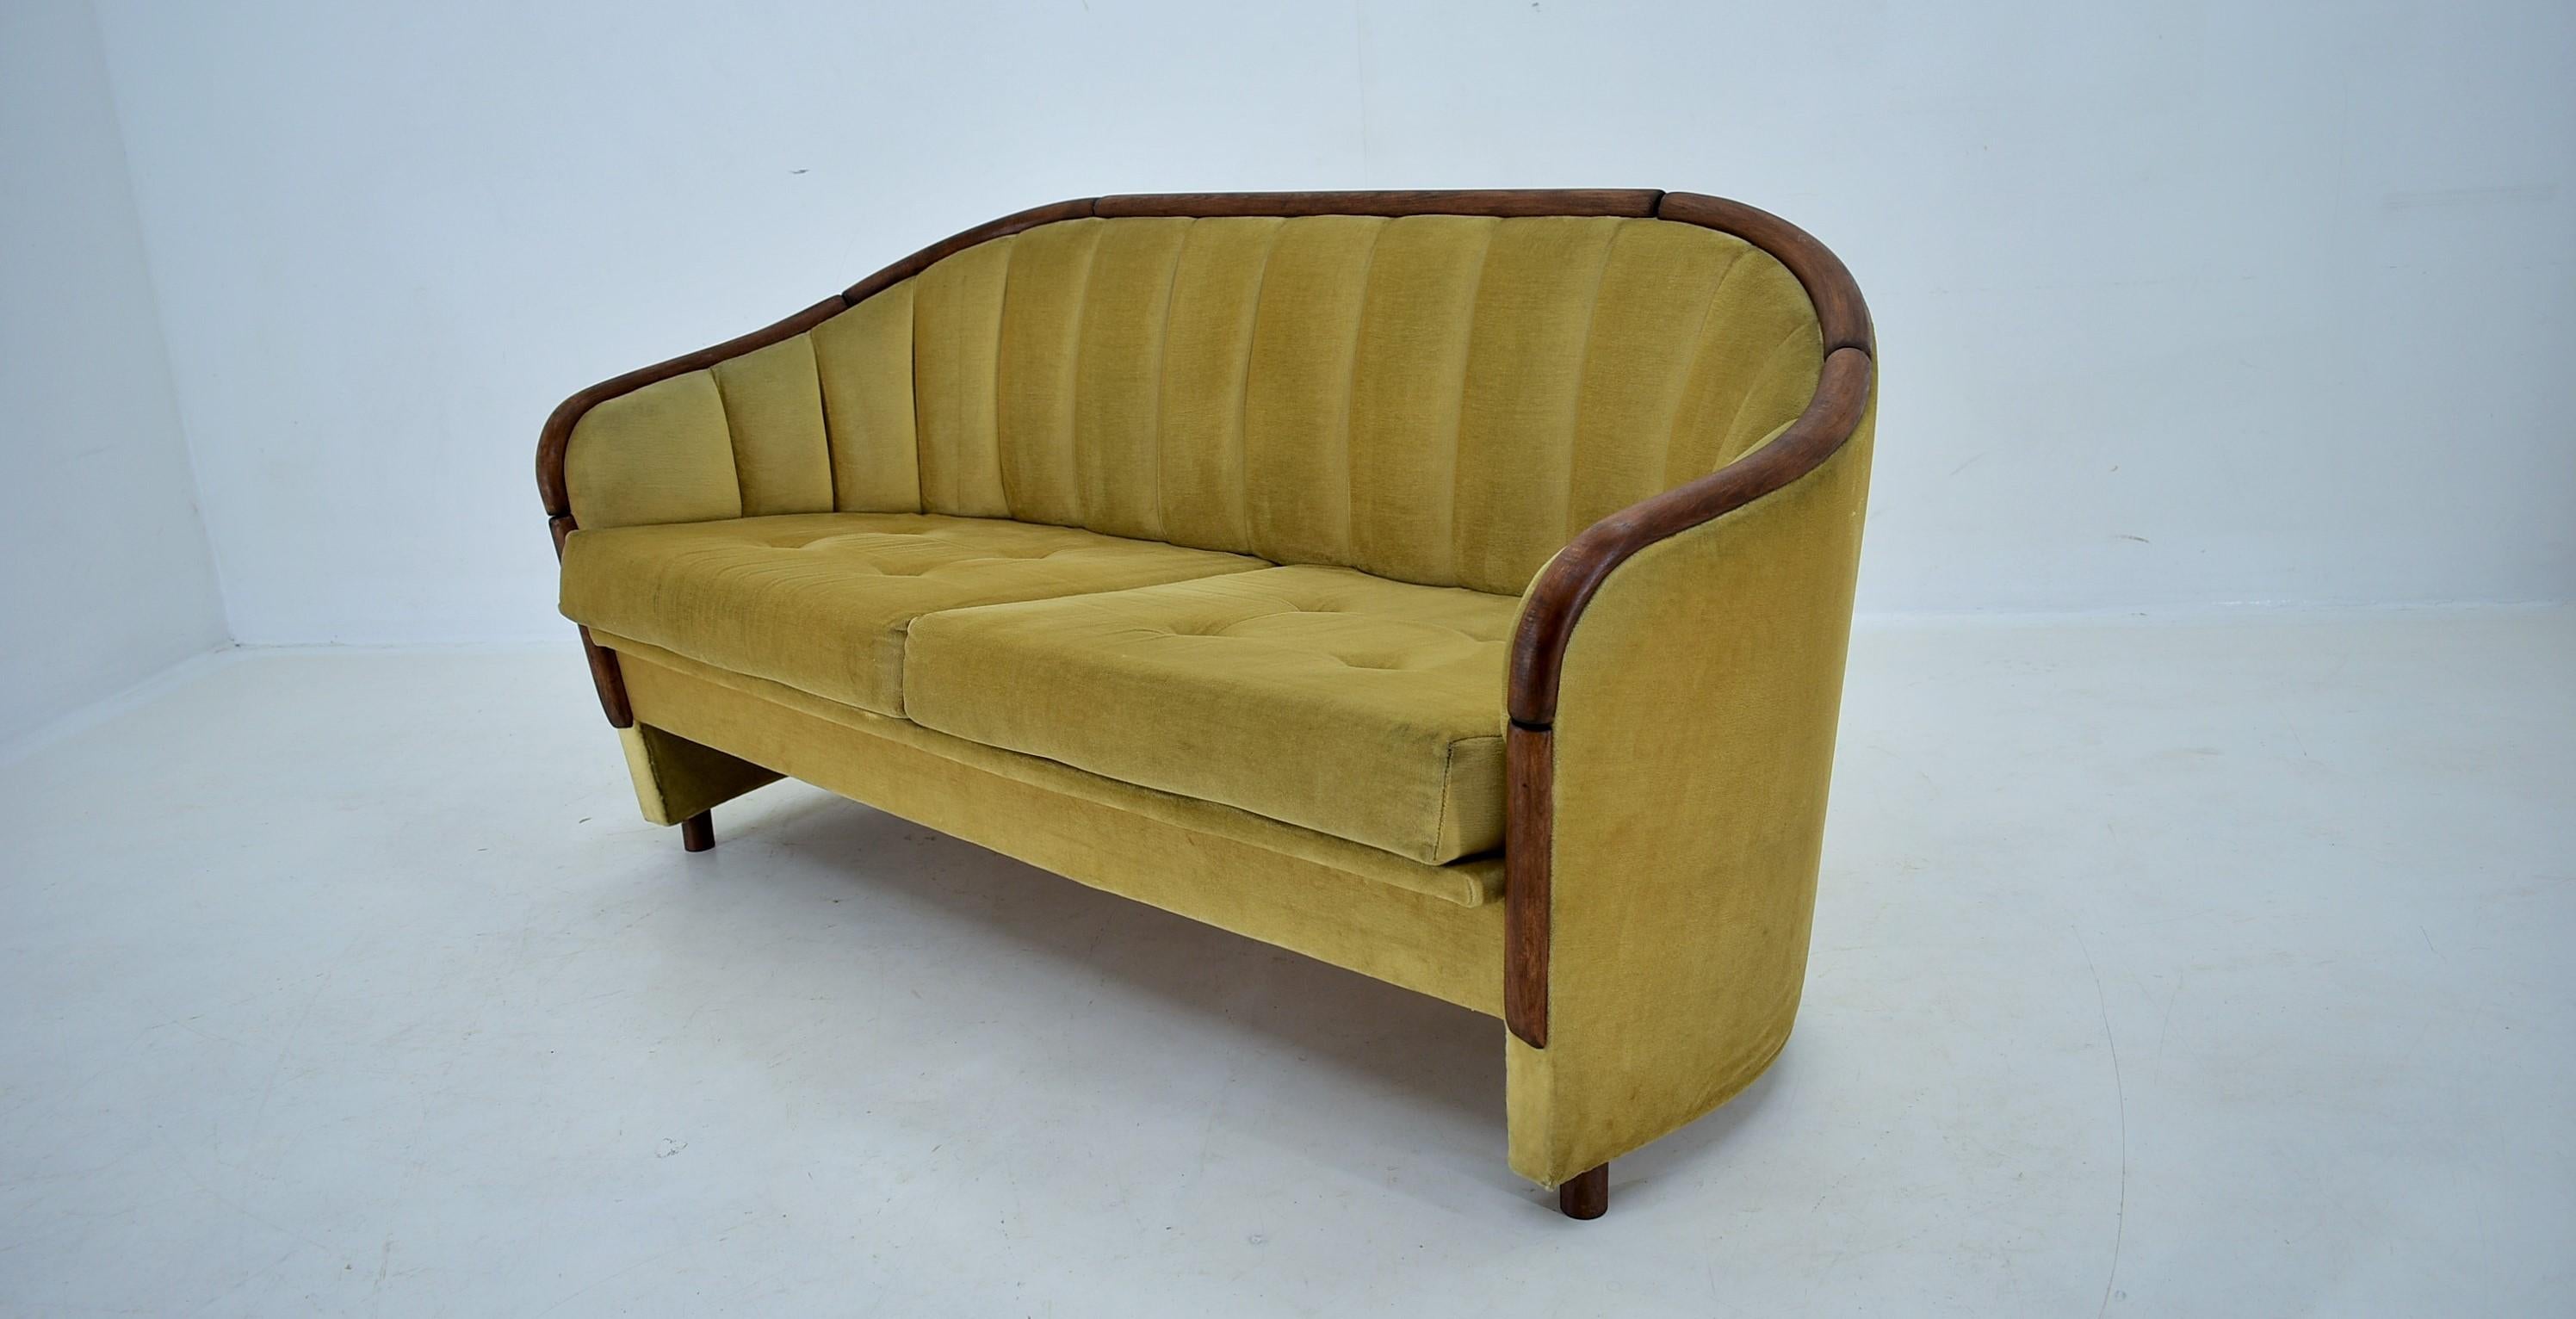 Italian 2-Seat Sofa in the Style of Gio Ponti, 1950s For Sale 10